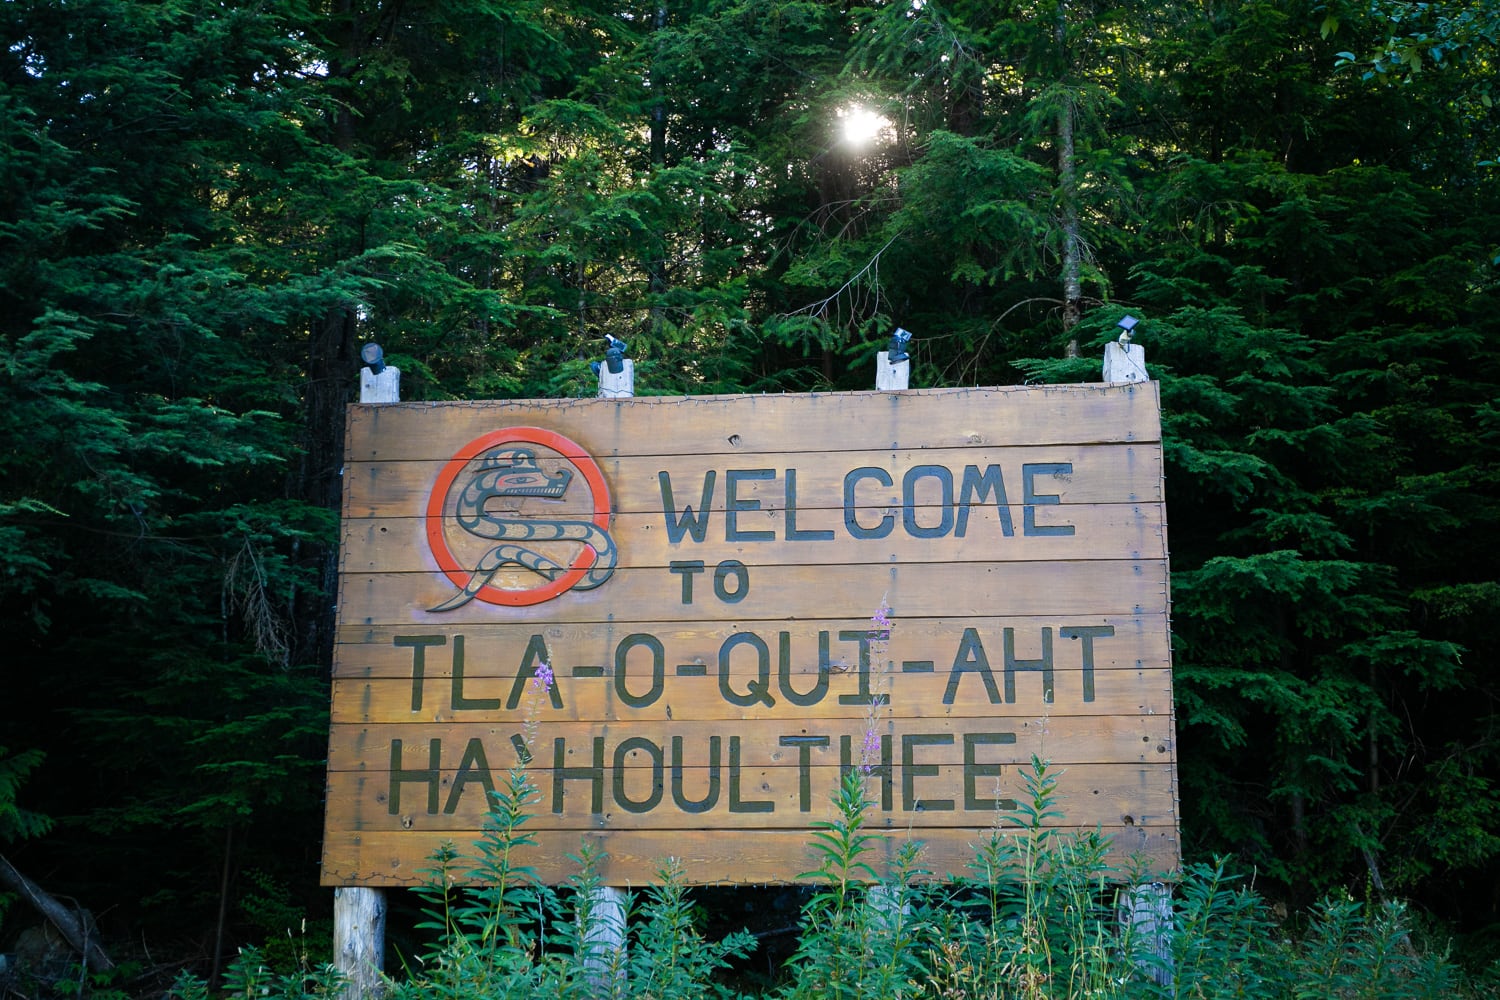 Photo of a wooden sign that reads “Welcome to Tla-o-qui-aht Ha’houlthee”. The sign is in front of green cedar trees.